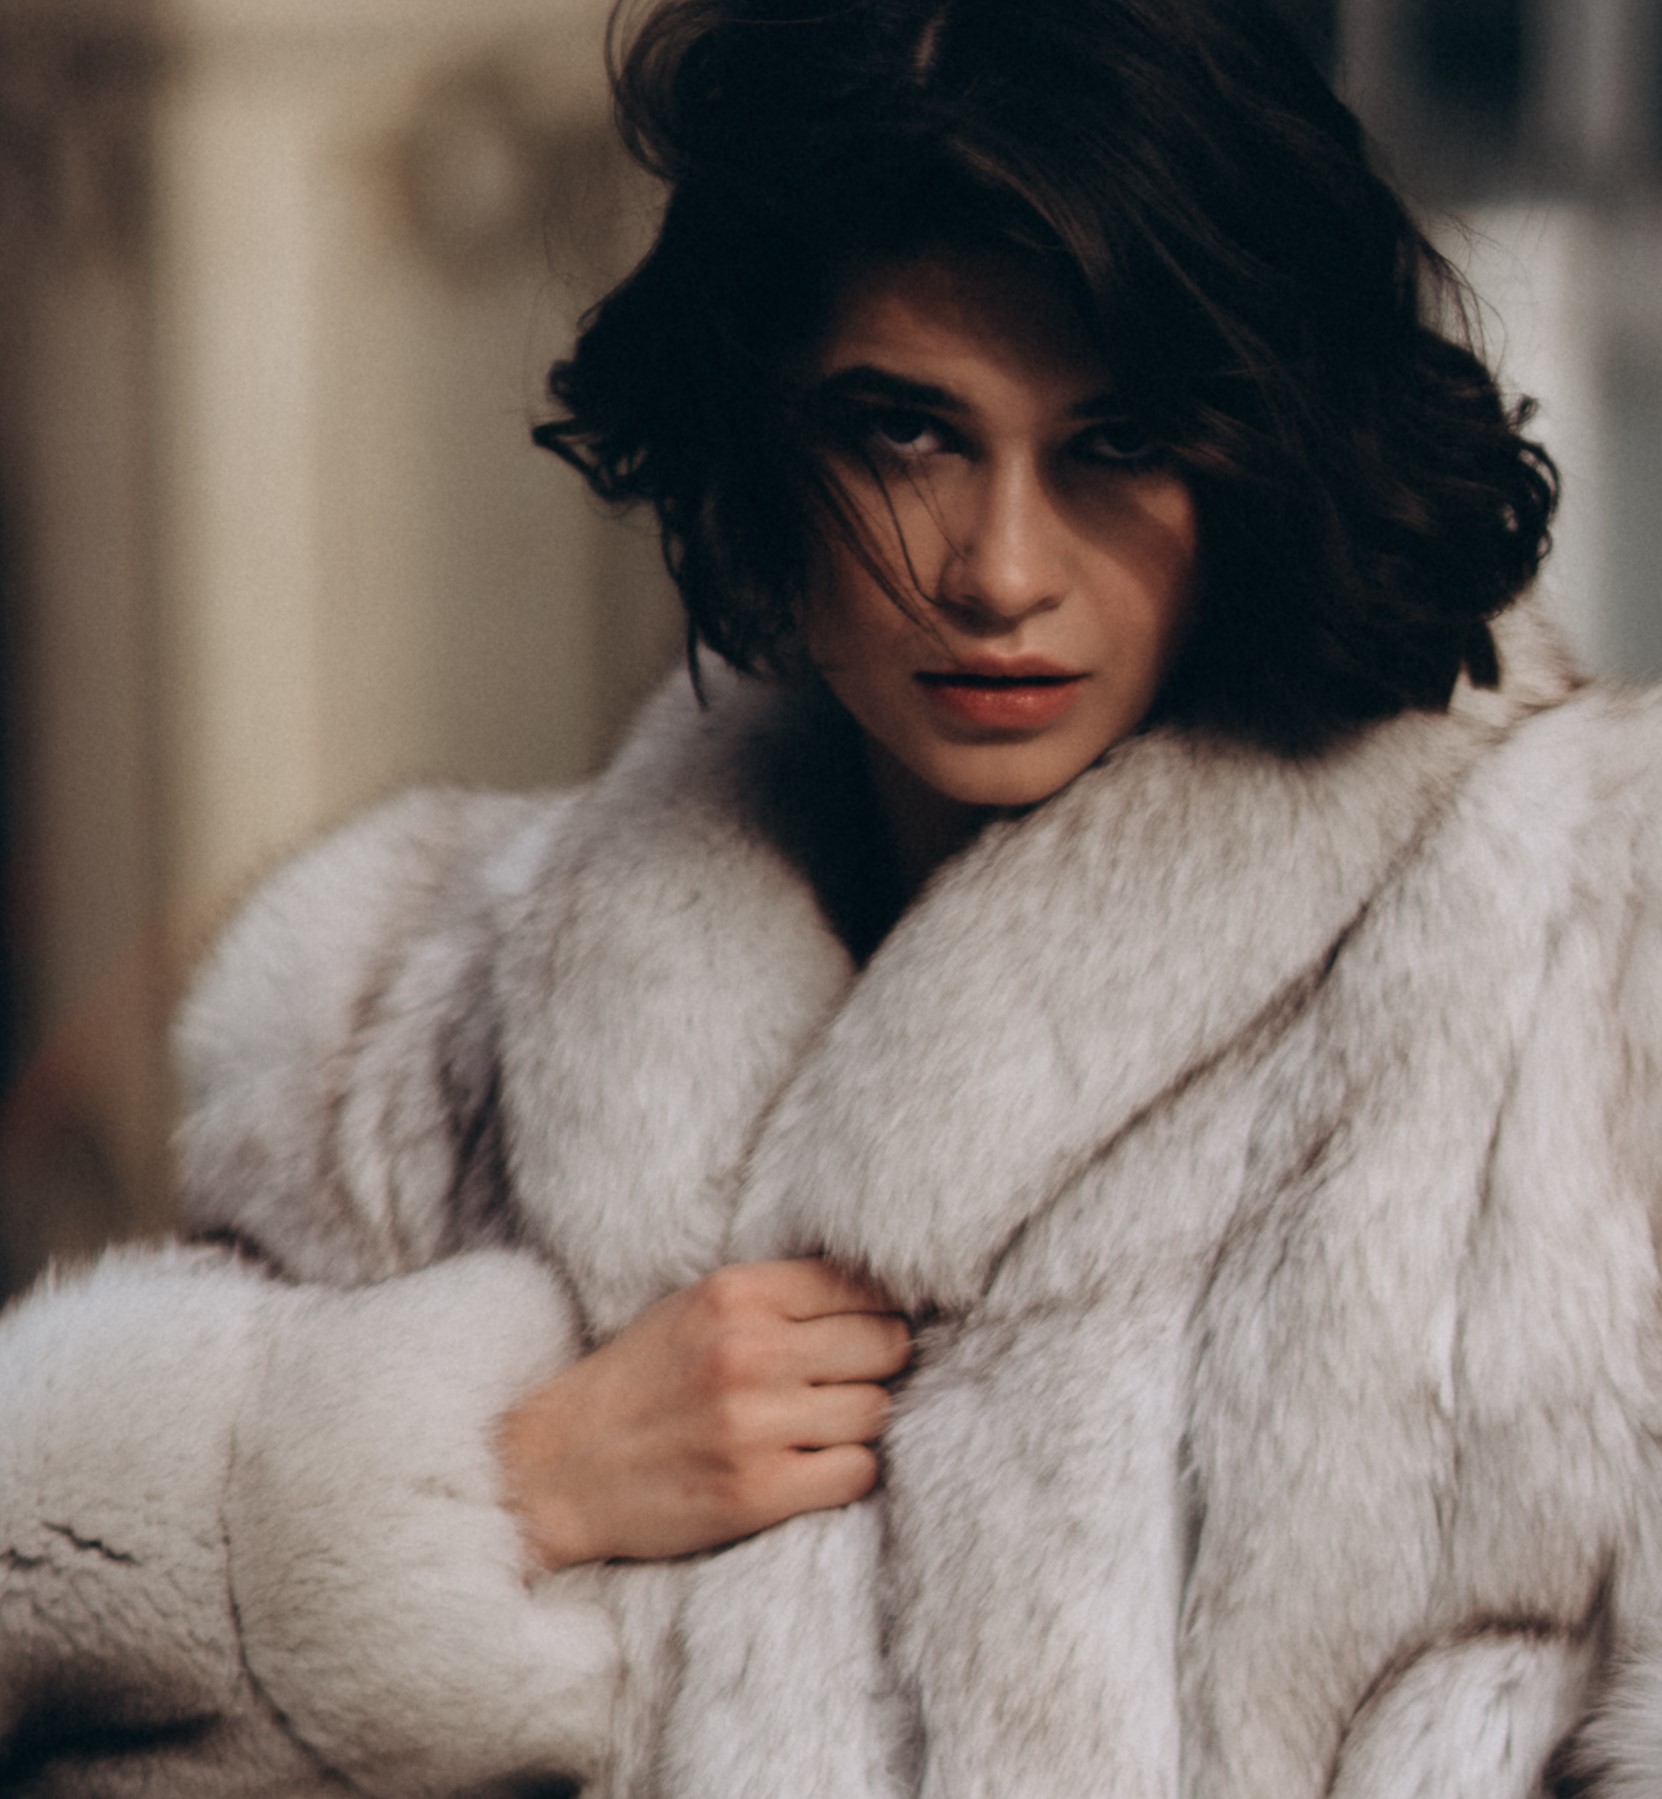 Woman with black hair grasping her white fur coat with one hand